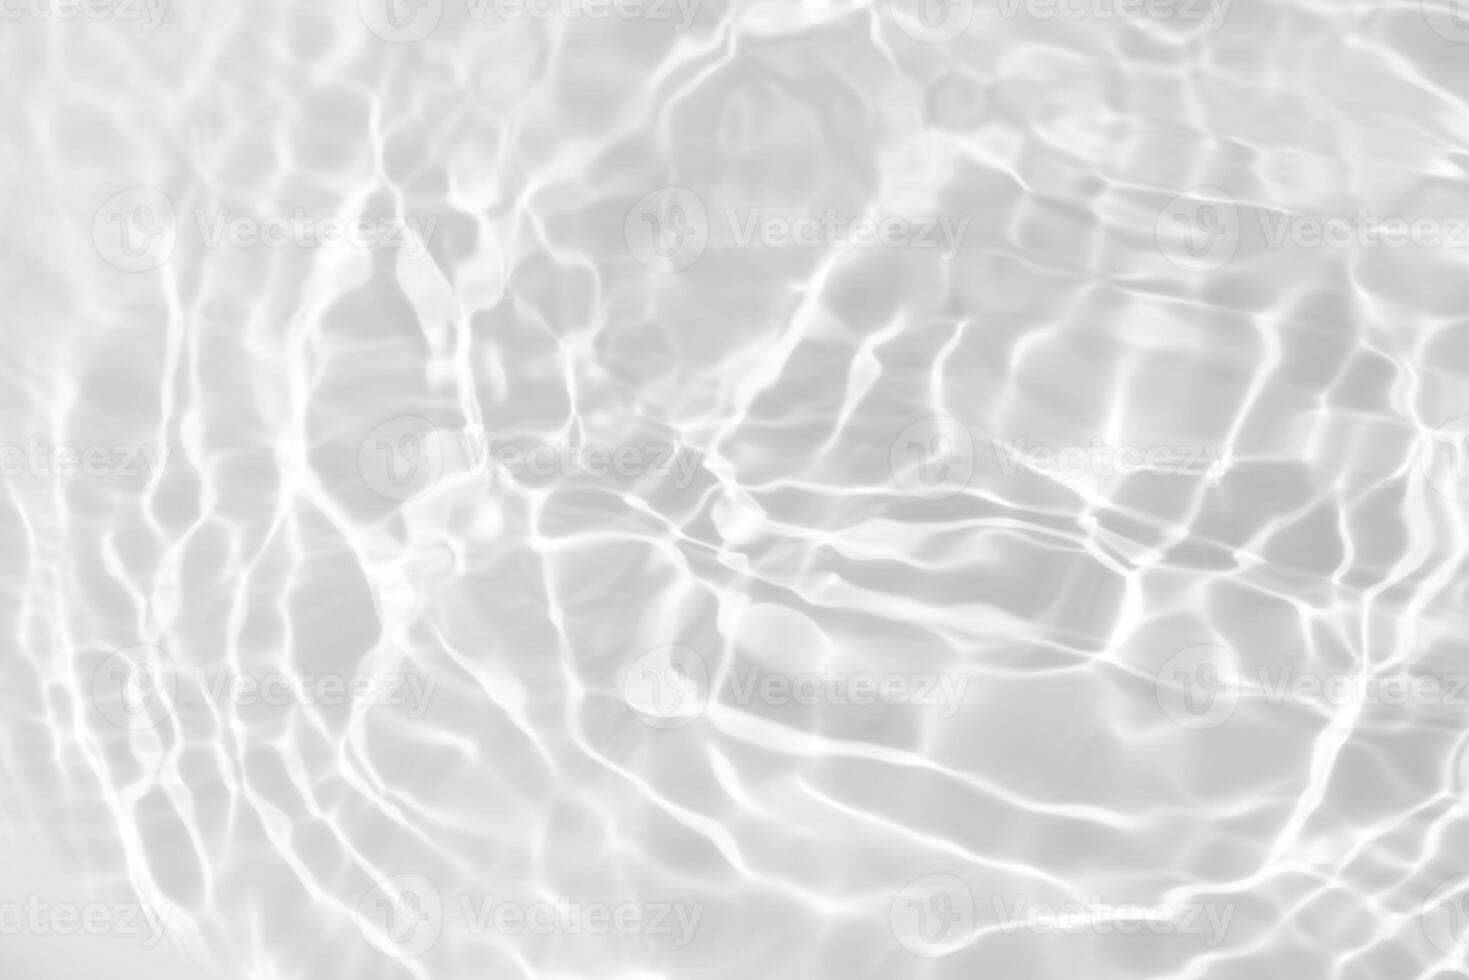 Water surface. Bluewater waves on the surface ripples blurred. Defocus blurred transparent blue colored clear calm water surface texture with splash and bubbles. Water waves with shining pattern. photo